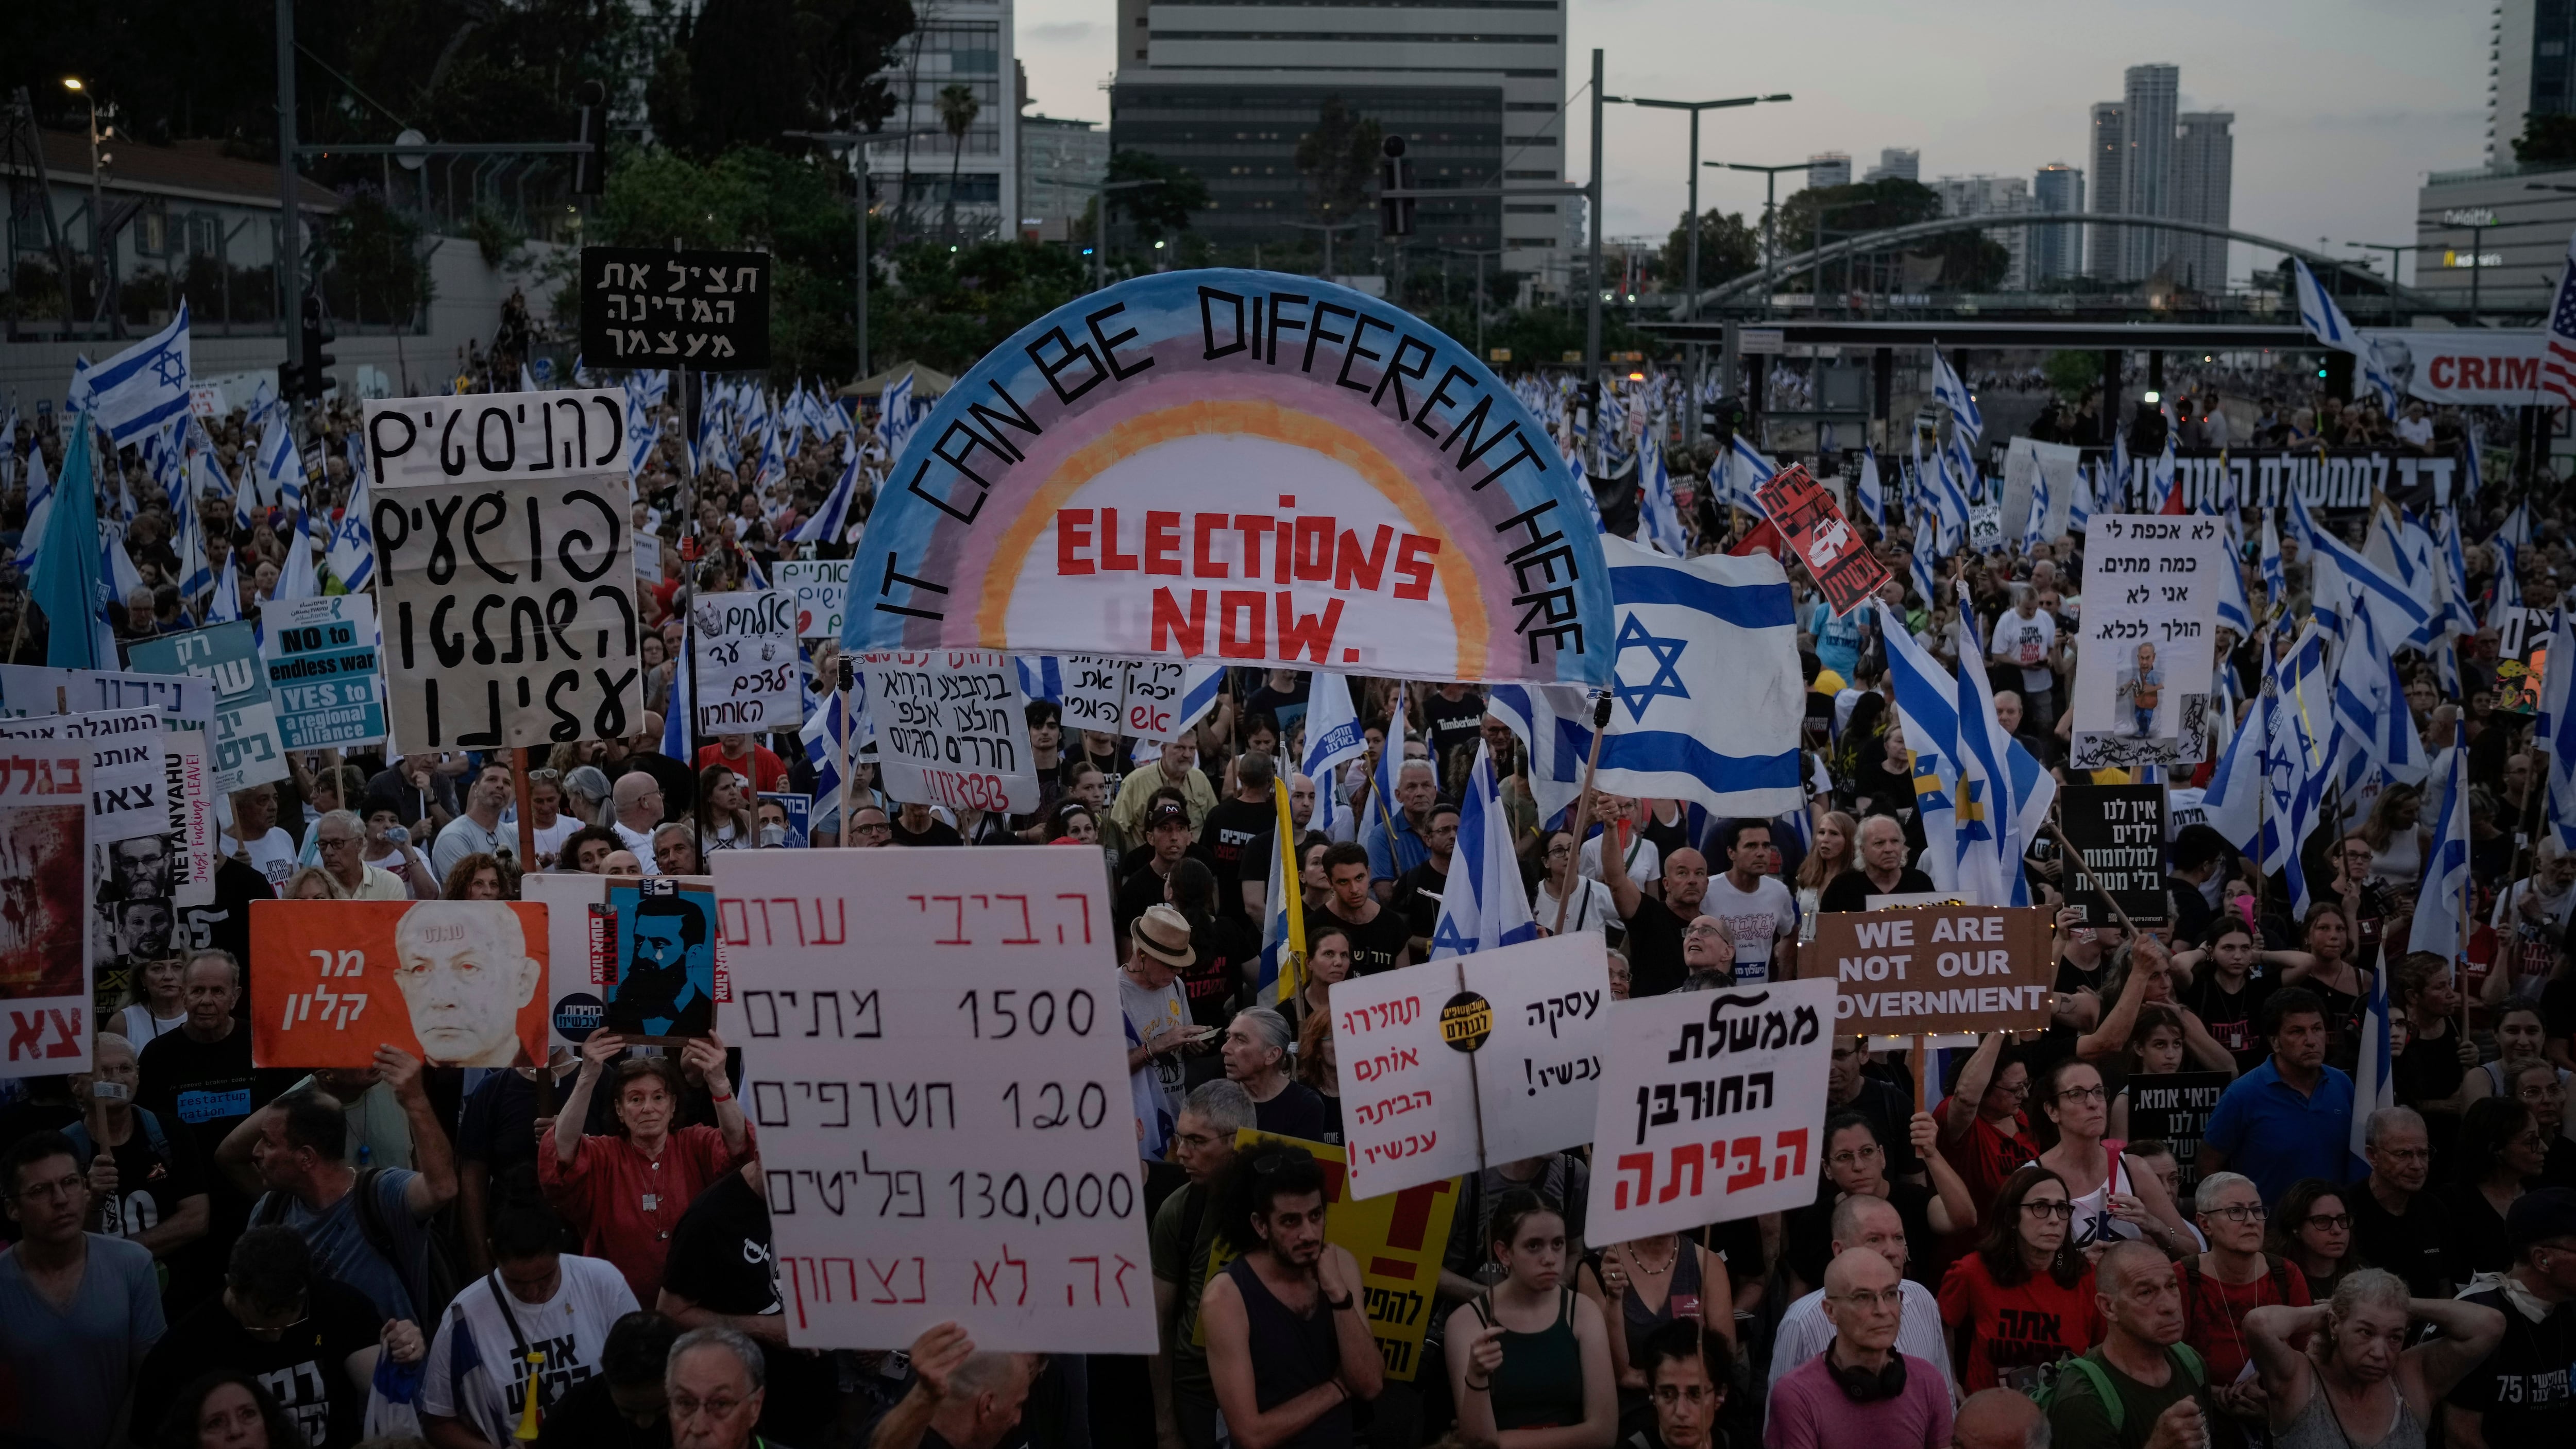 People attend a protest against Israeli Prime Minister Benjamin Netanyahu and his government, and demanding elections, in Tel Aviv (Leo Correa/AP)